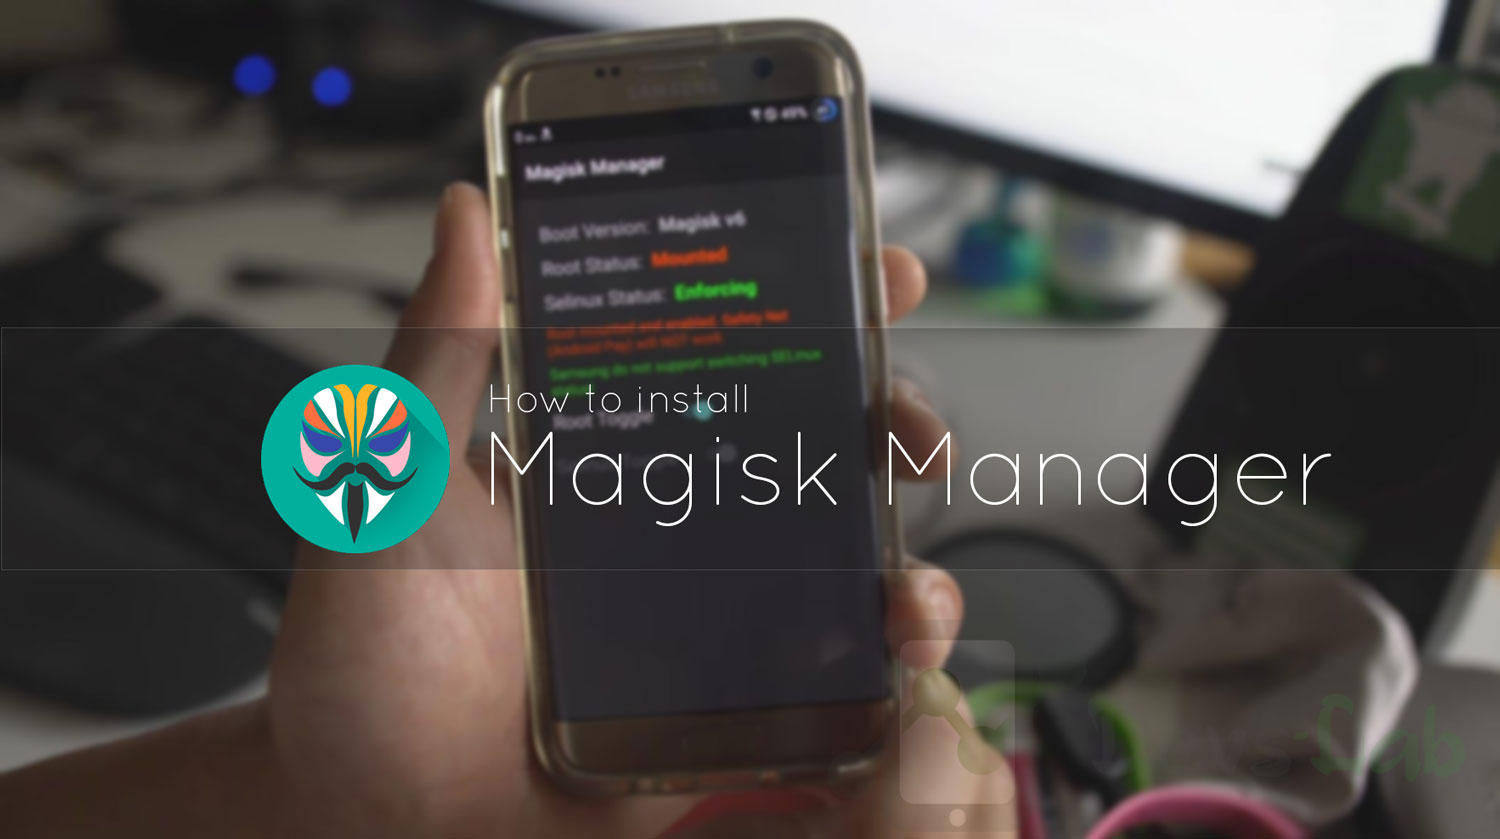 How to install Magisk Manager in Android to hide Root from certain Apps